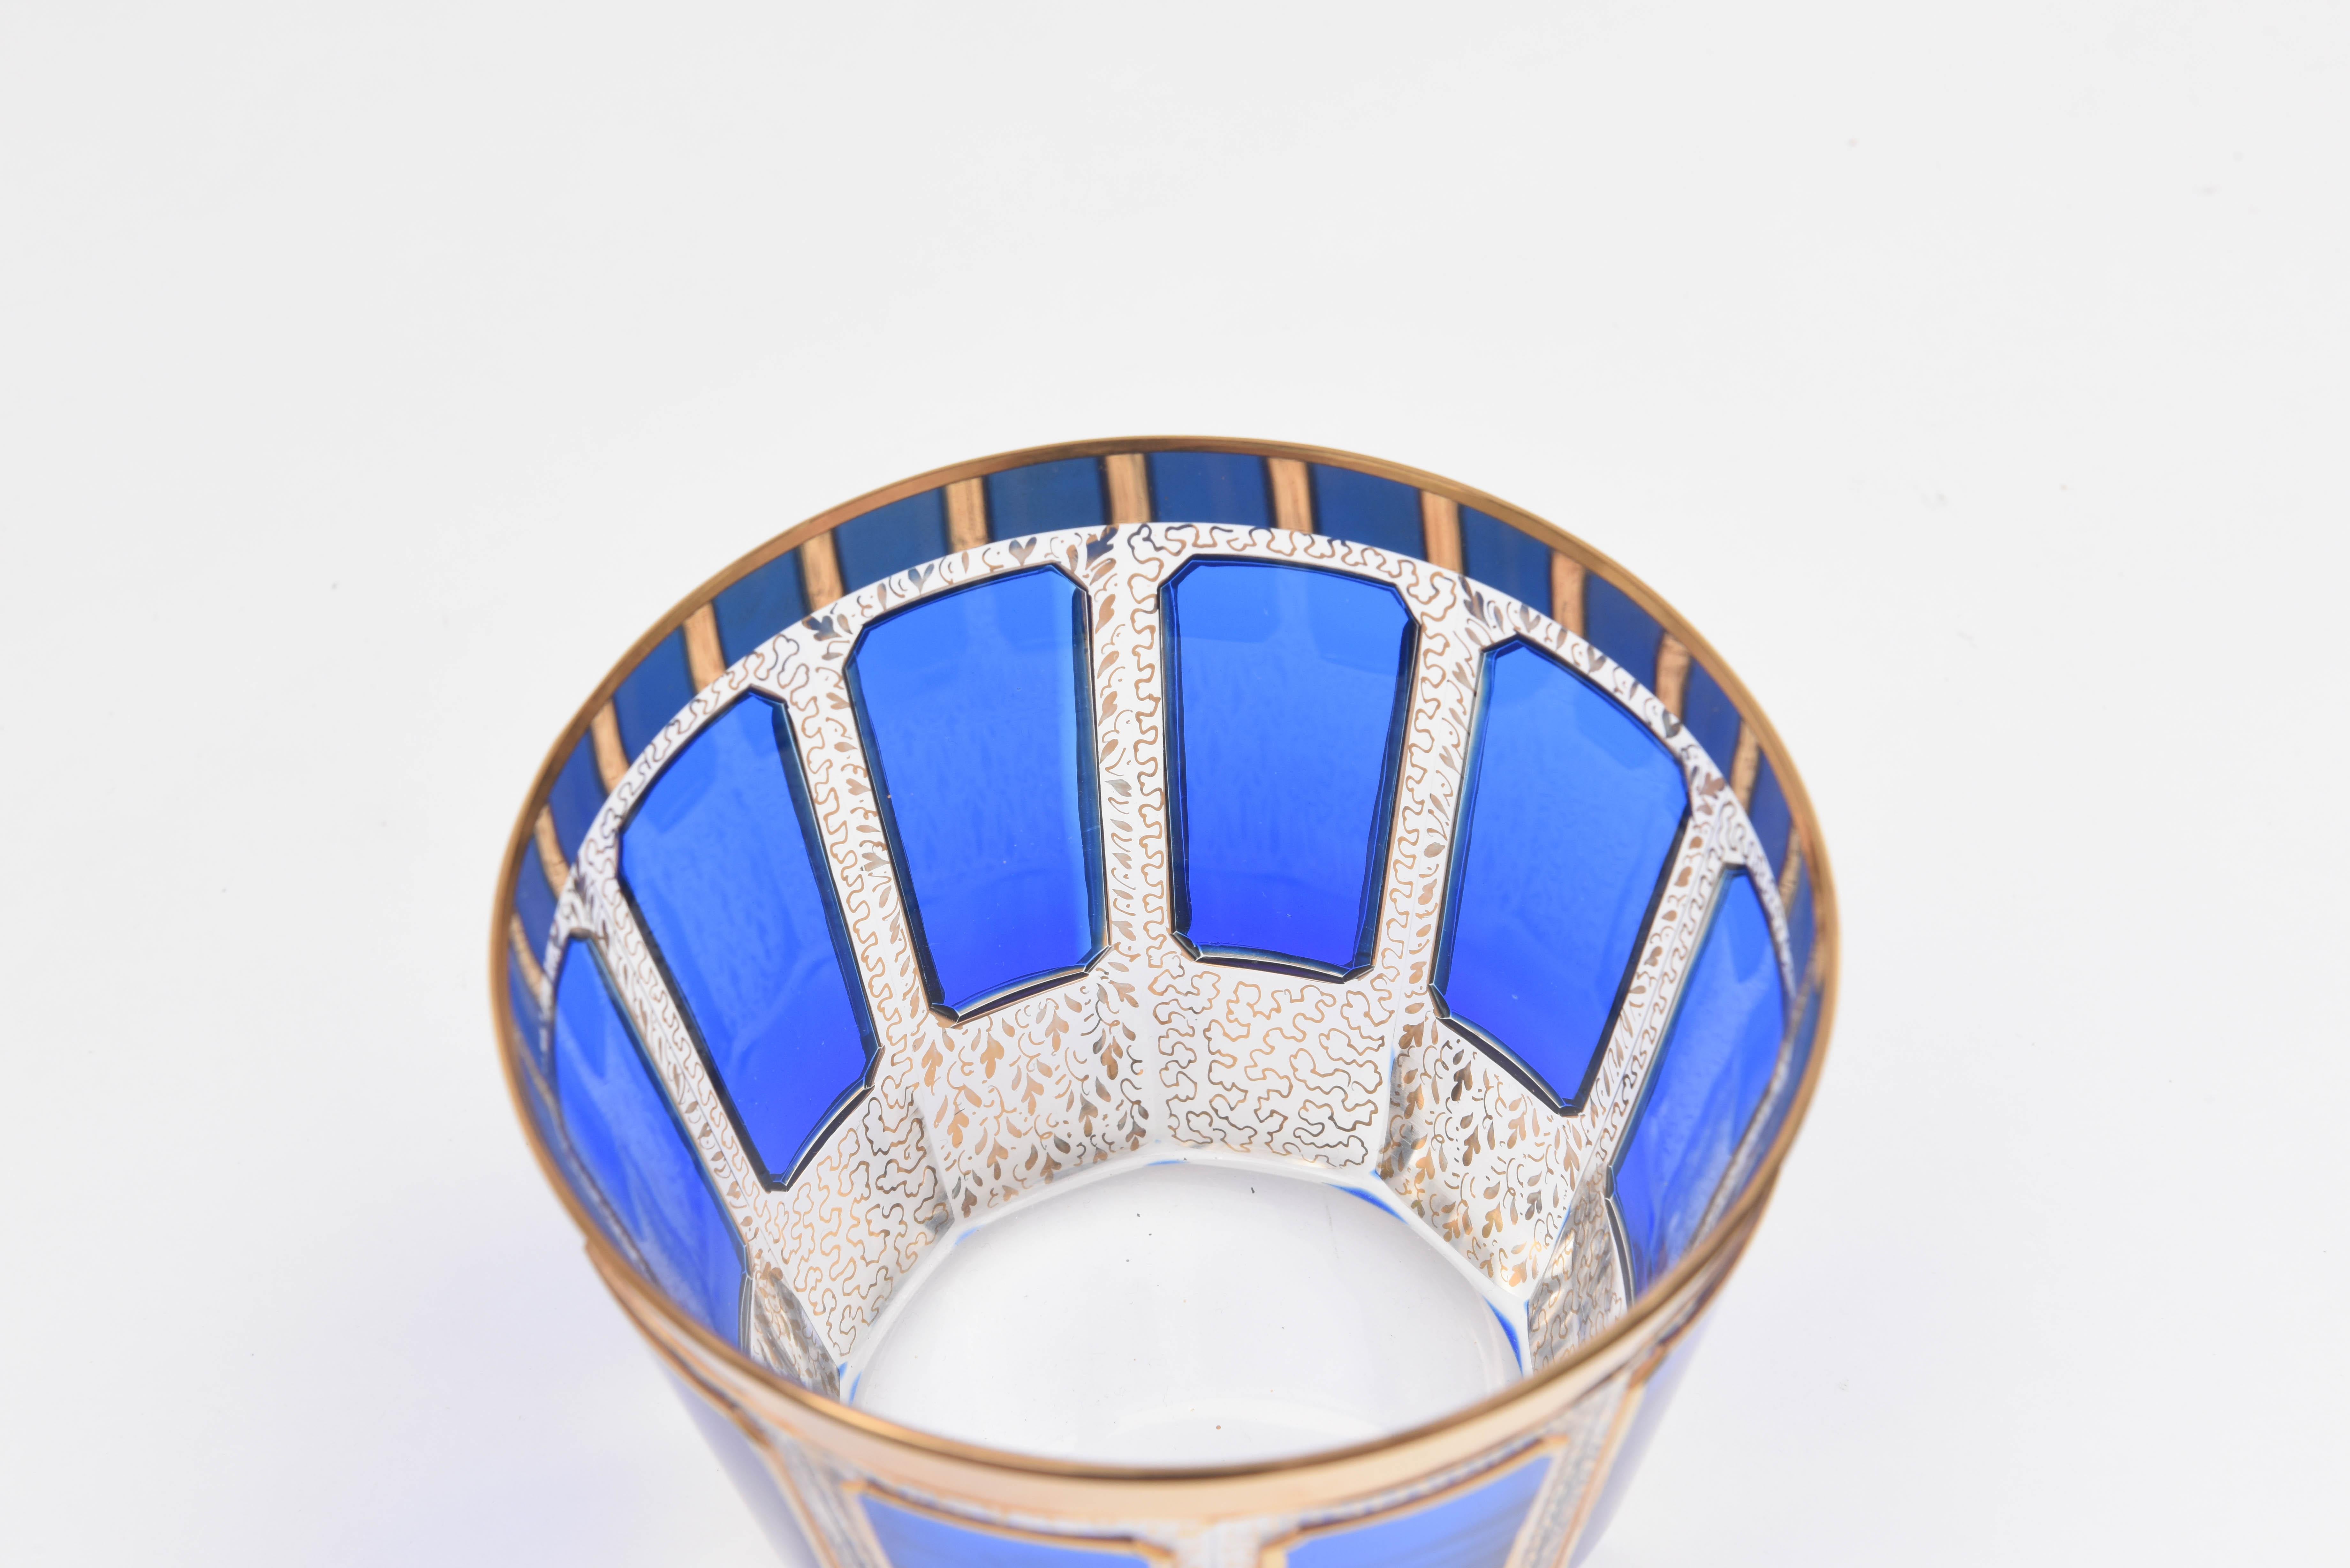 Mid-20th Century Antique Crystal Ice Bucket, Moser or Moser Style Cobalt Panel Glass and Gold